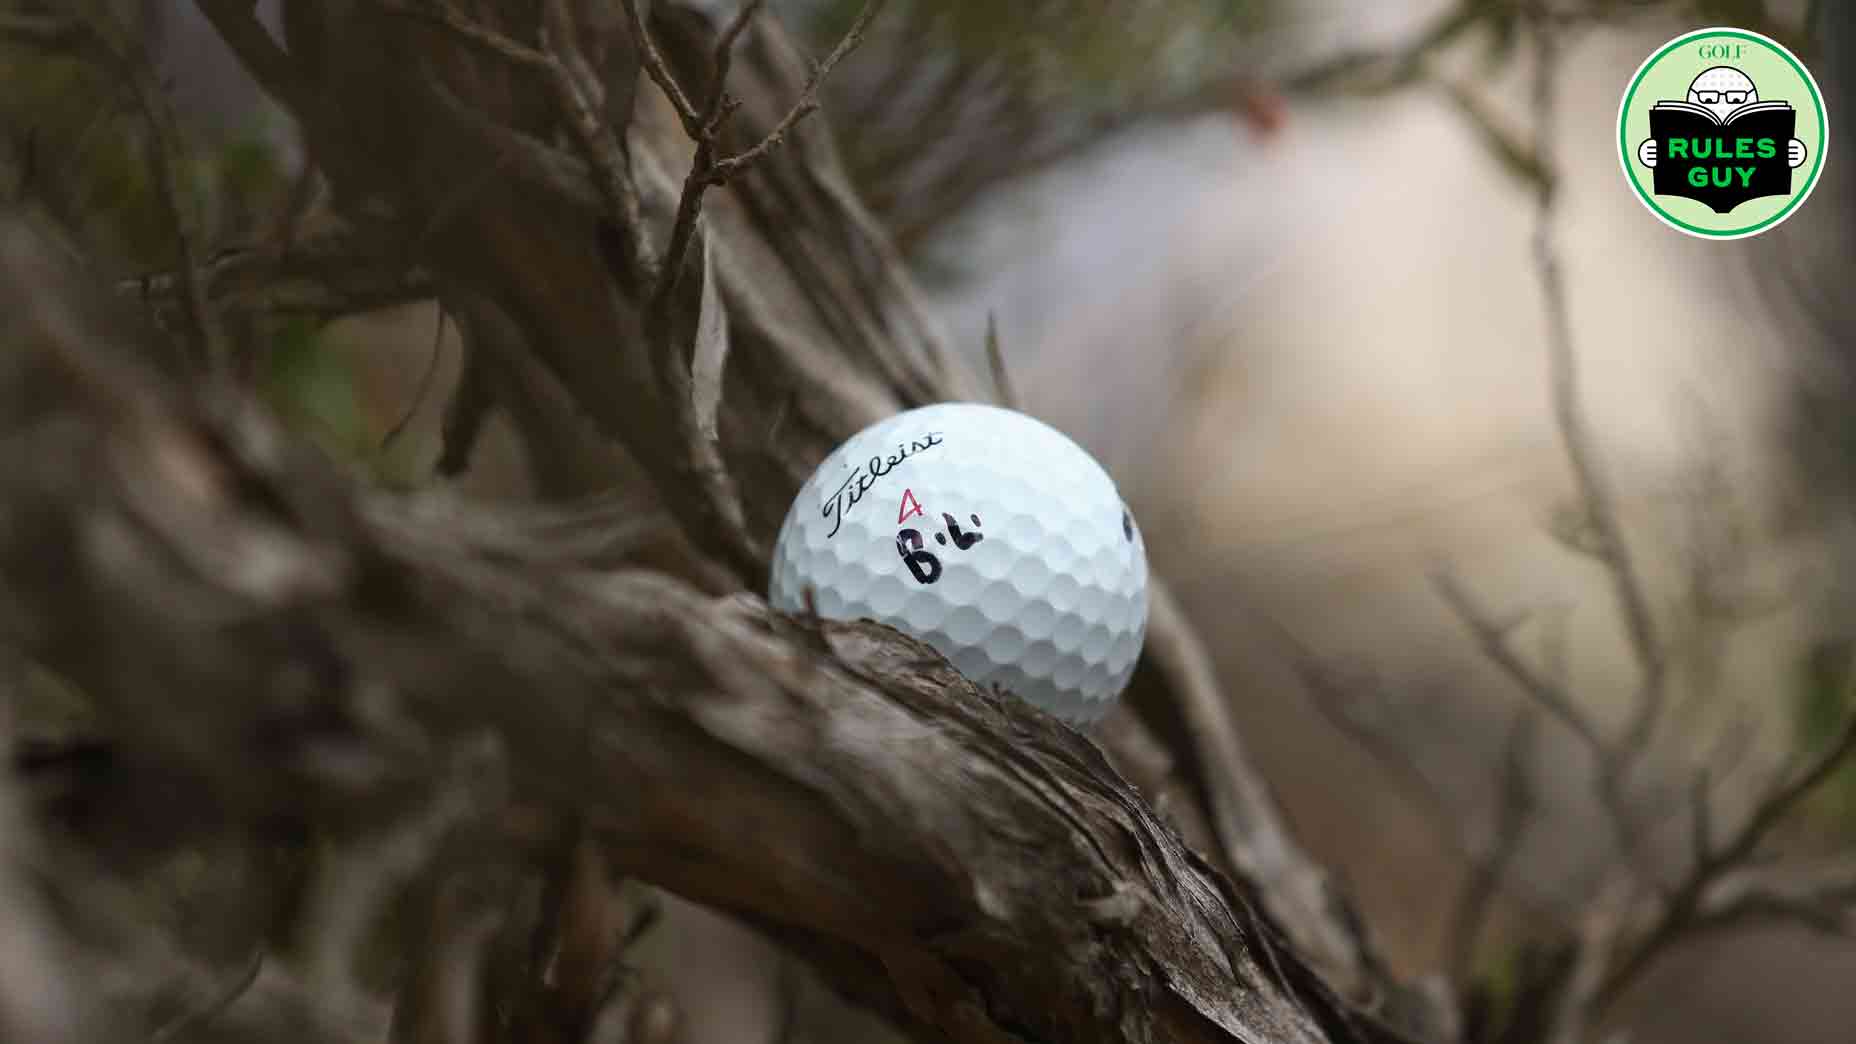 Can you take free relief if a ball lodges into a tree marked as GUR?